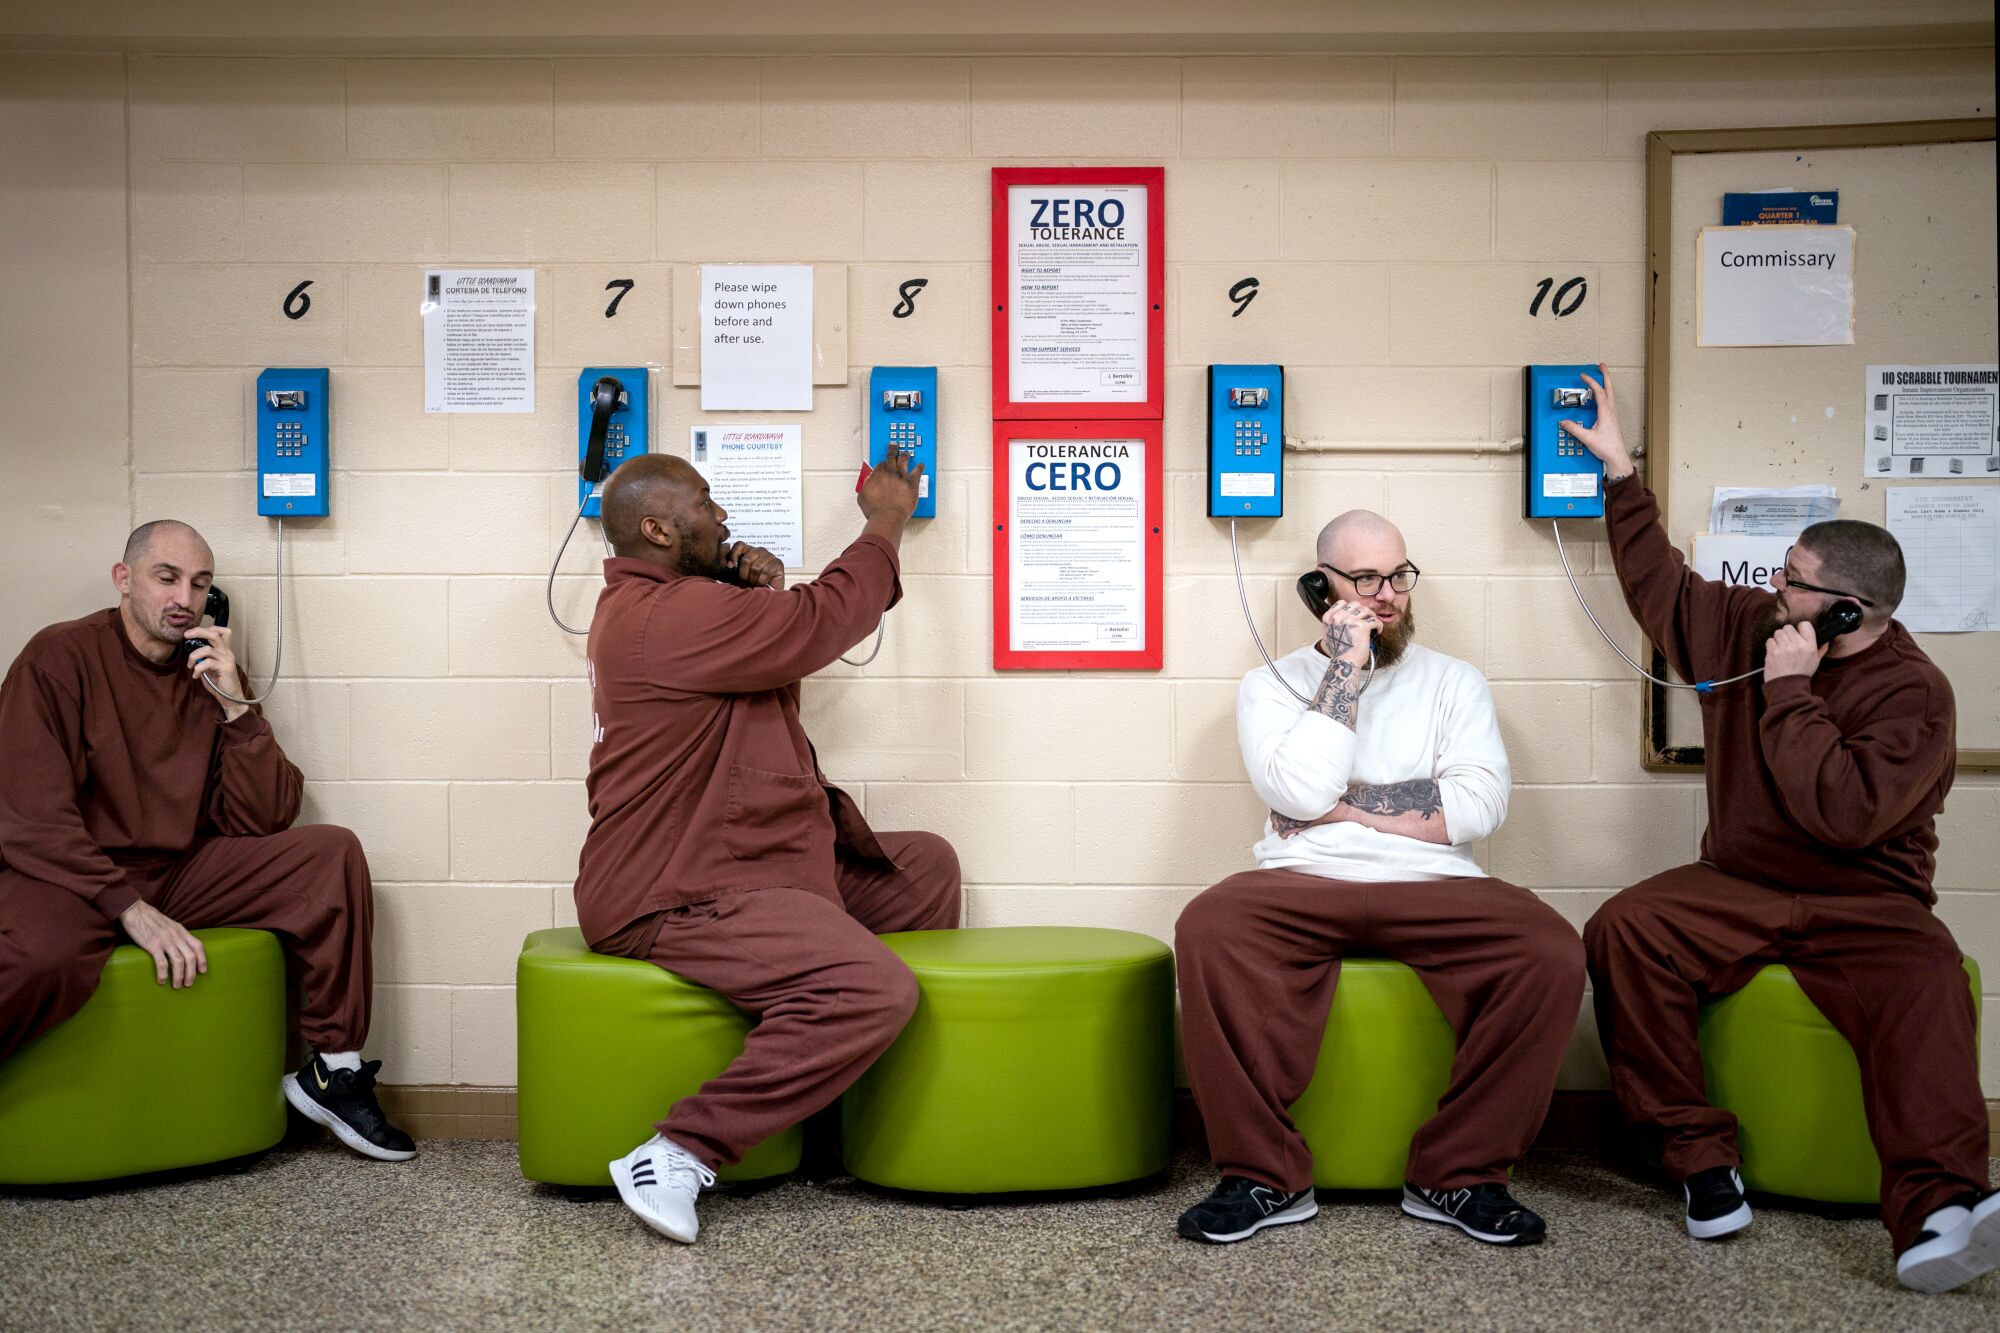 Four inmates in brown uniforms sit on bolsters and each talks to a phone mounted on the wall behind them.